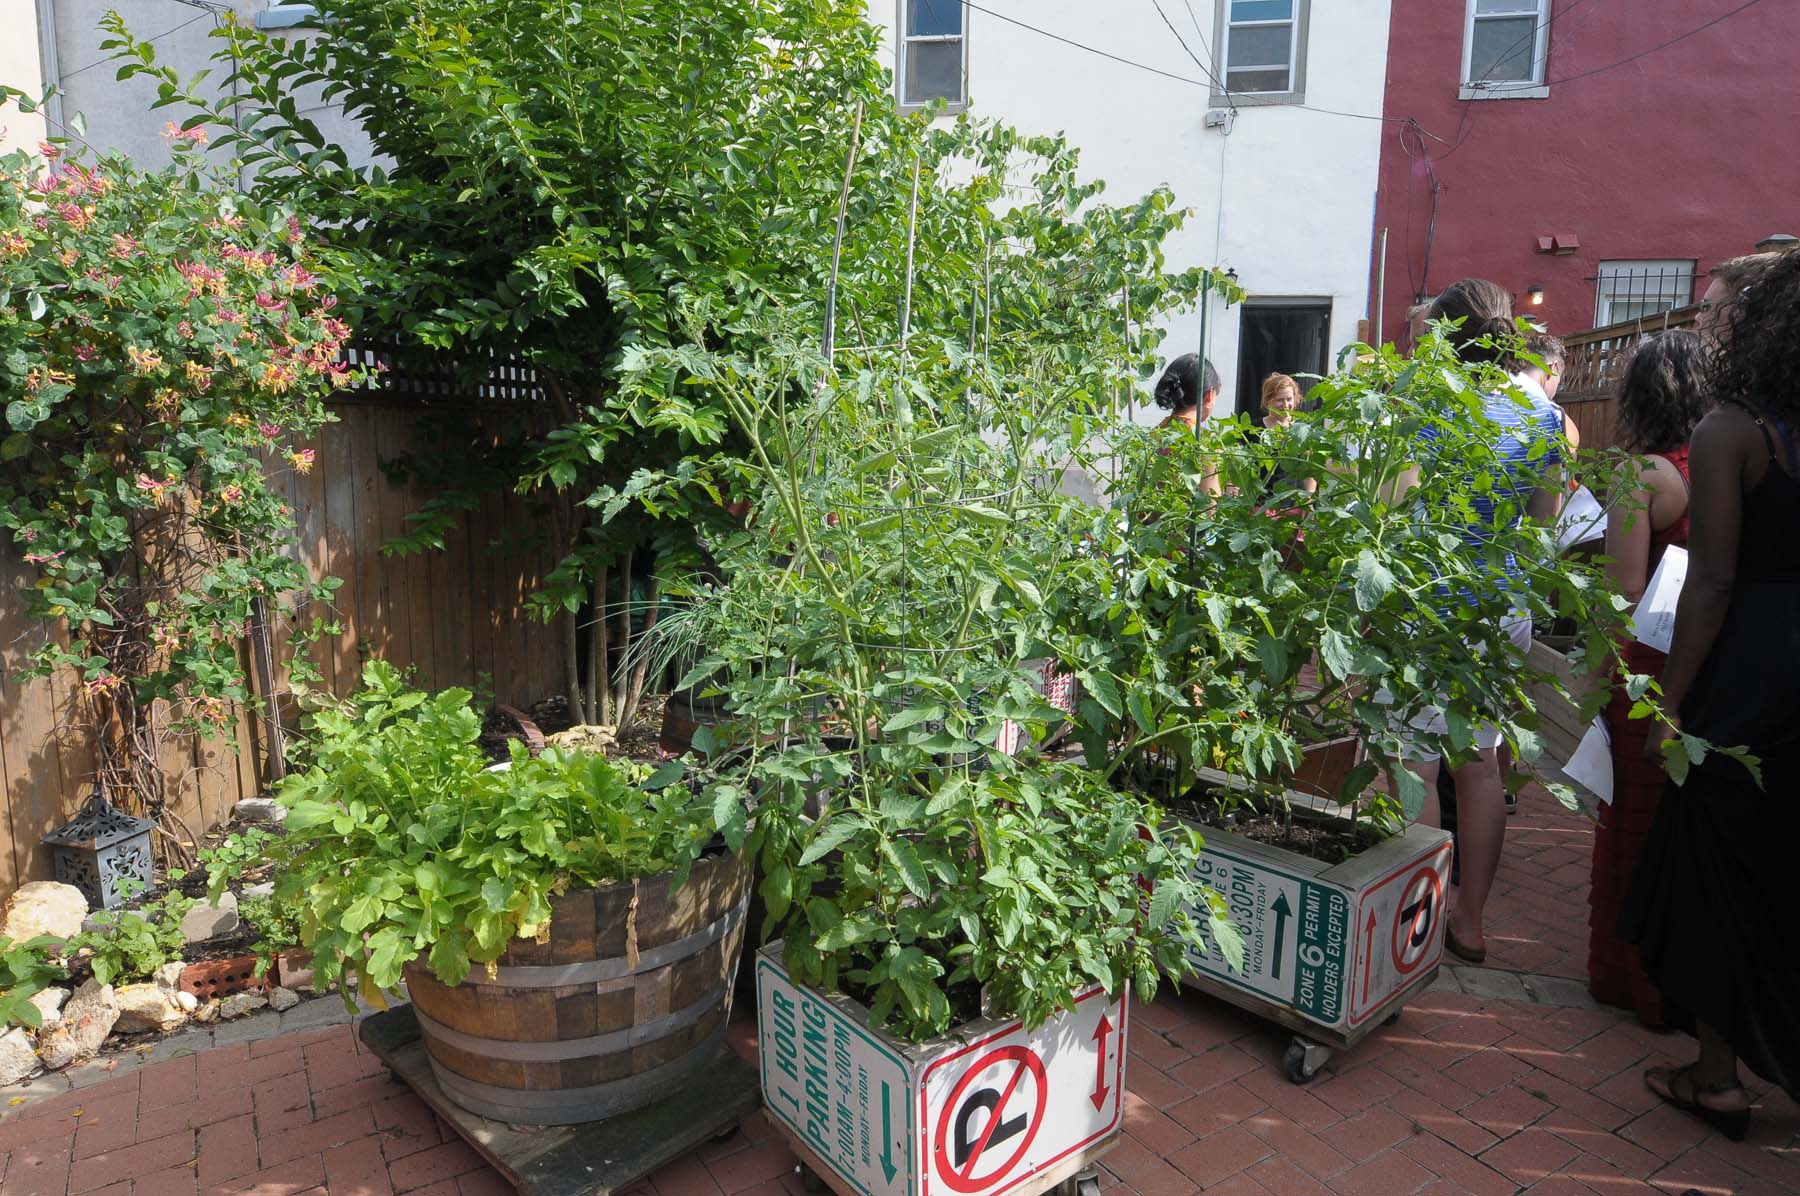 photo from:http://www.loulies.com/edible-urban-garden-tour-happy-hour/